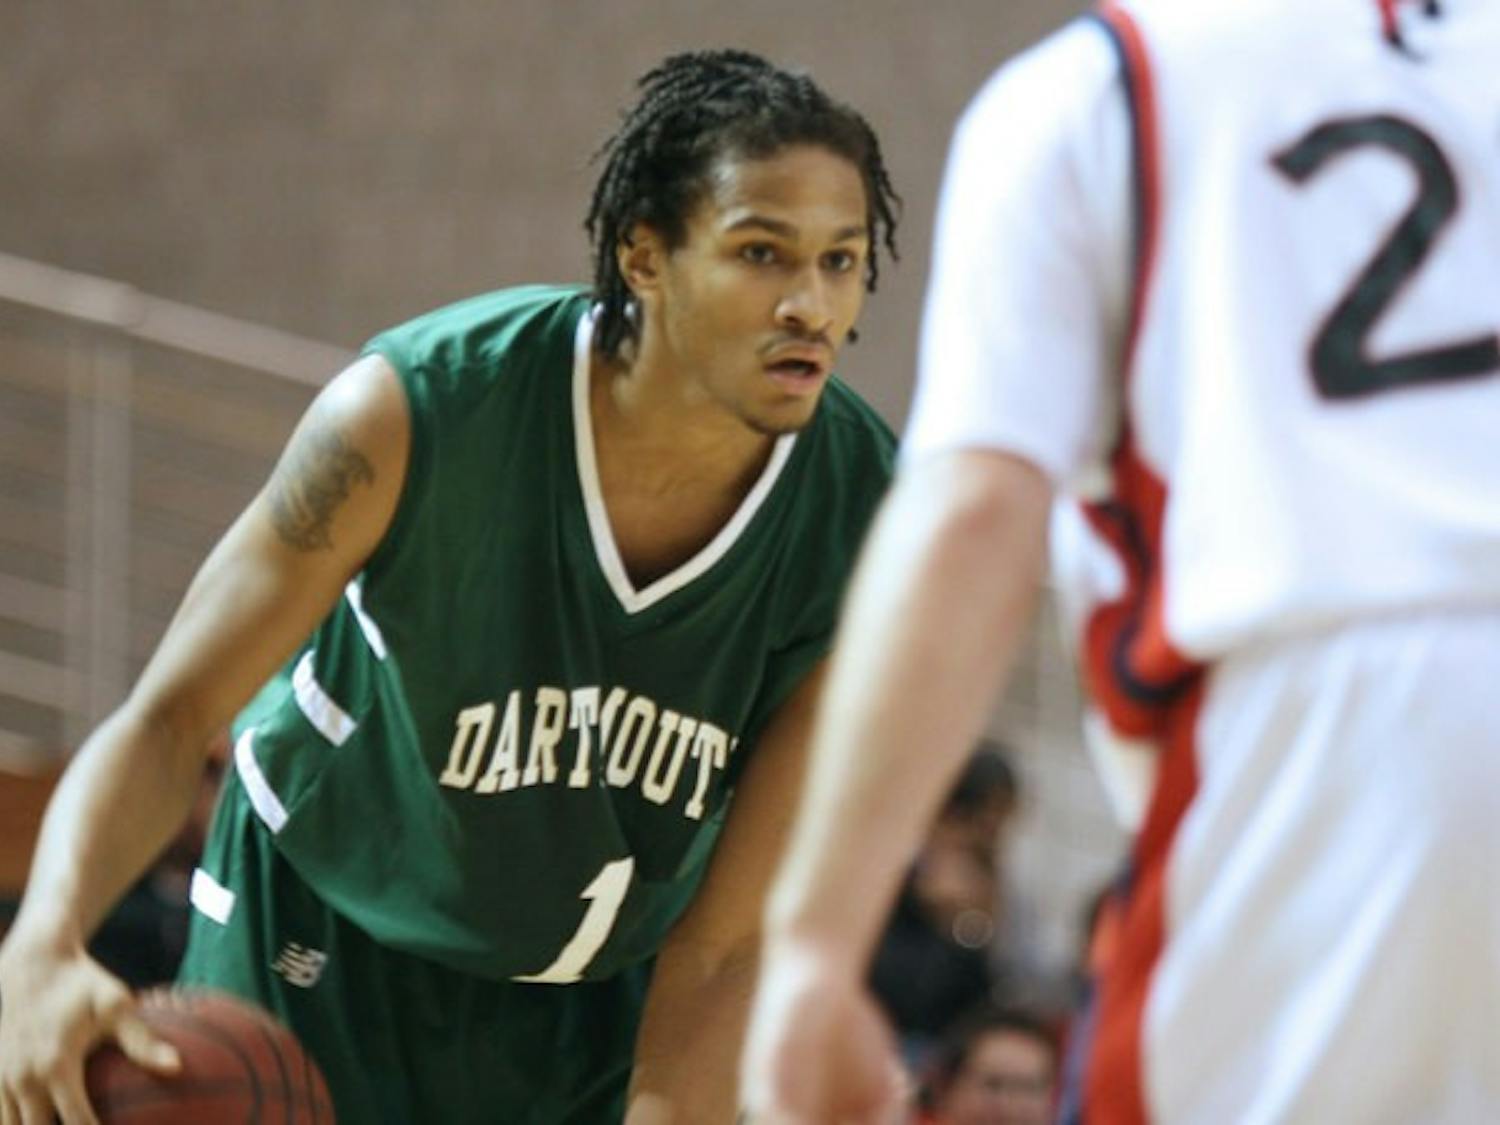 Alex Barnett '09 had a career-high 15 rebounds against VMI at the Air Force Classic in Colorado last weekend.